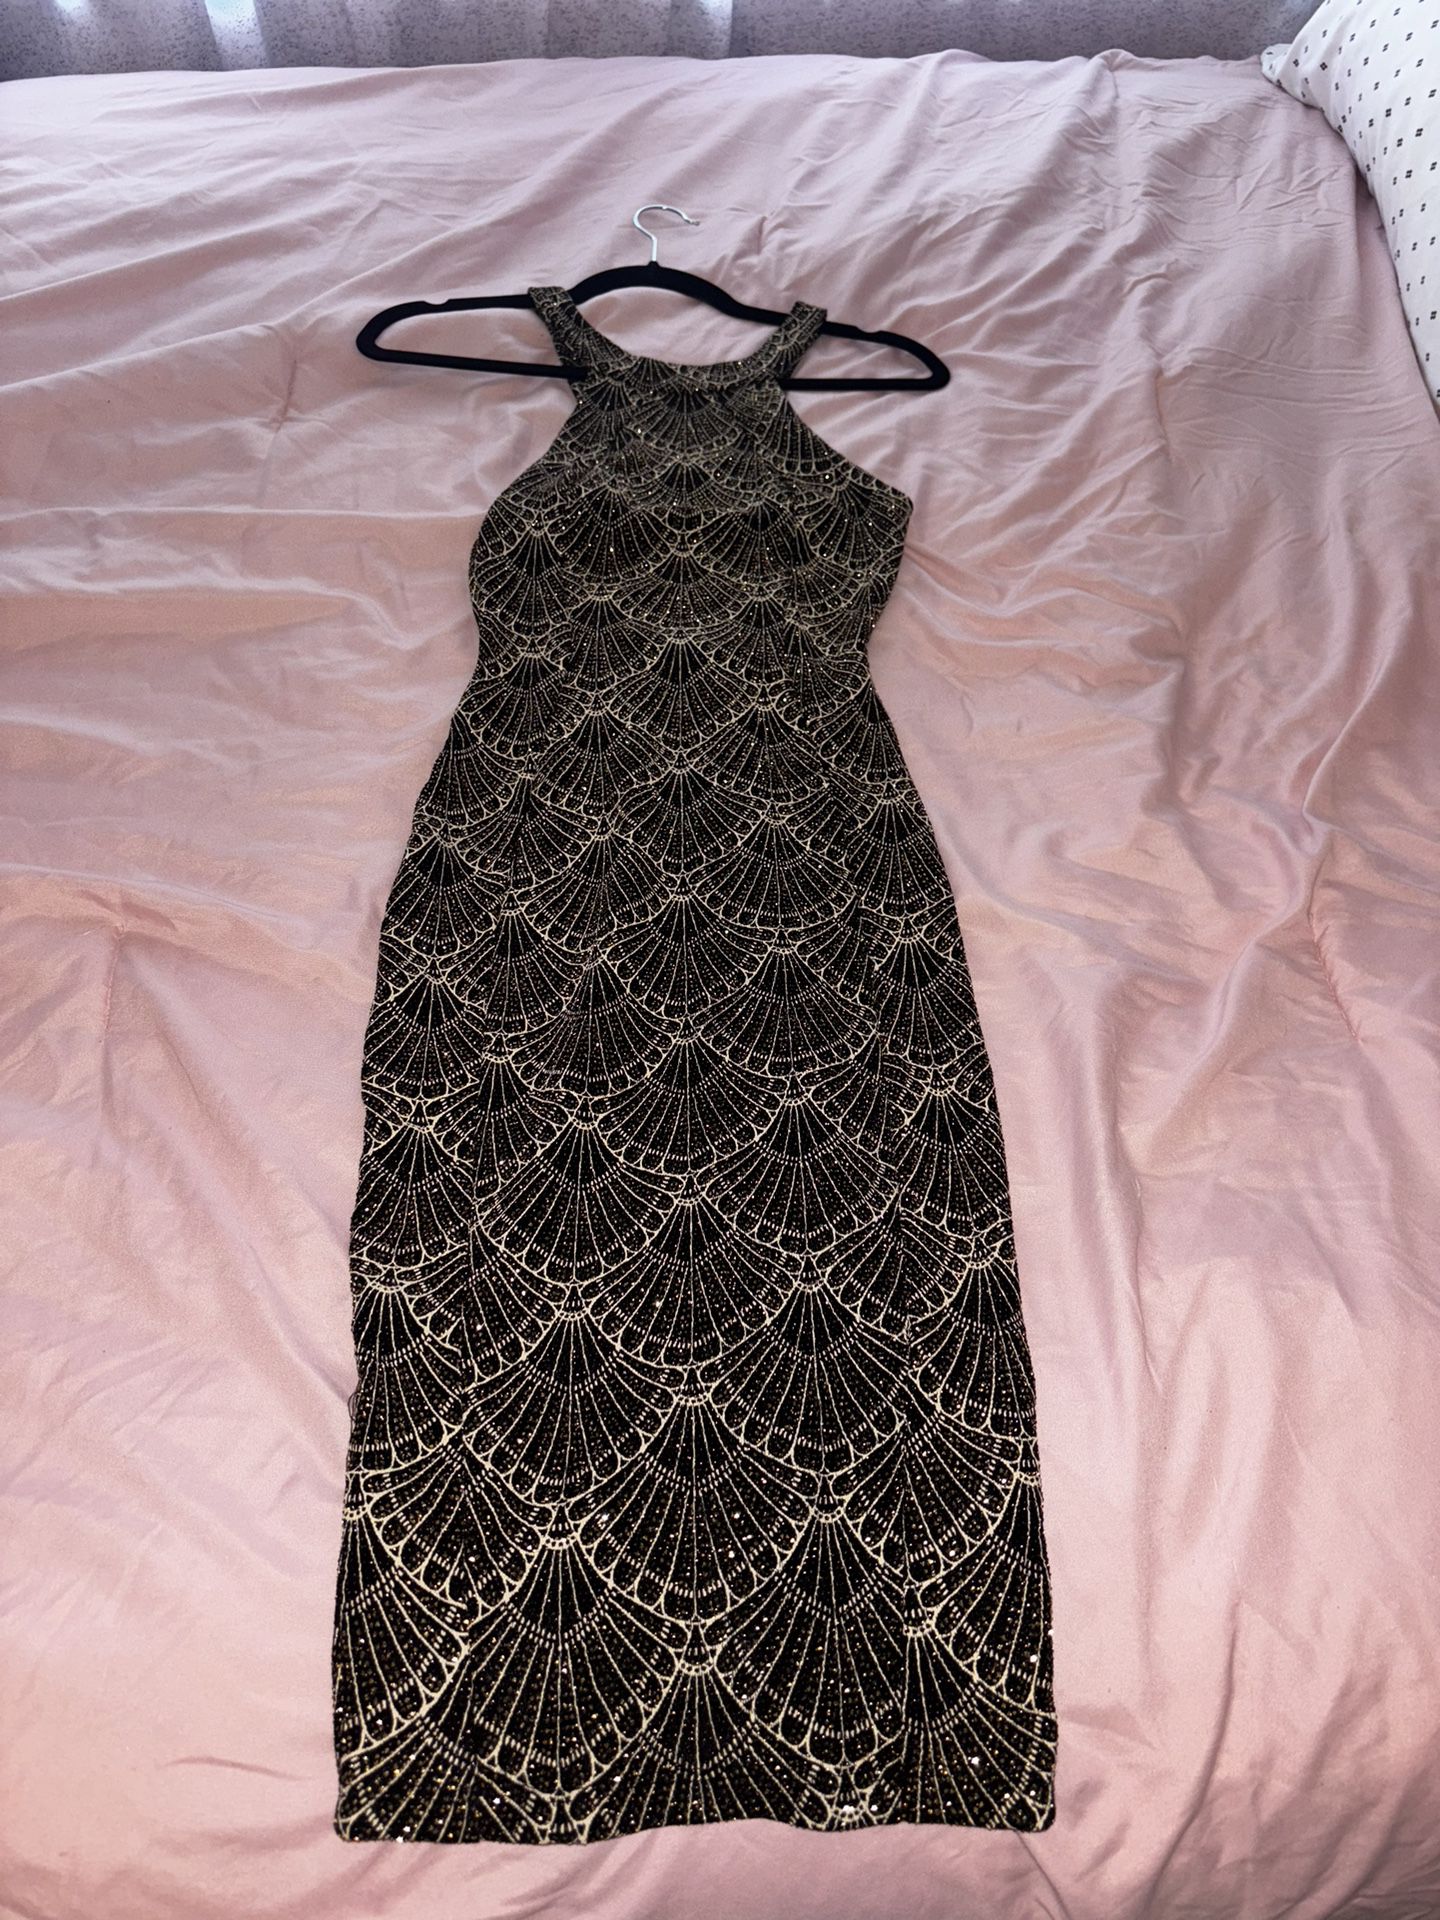 Black And Gold Dress, Bodycon Small